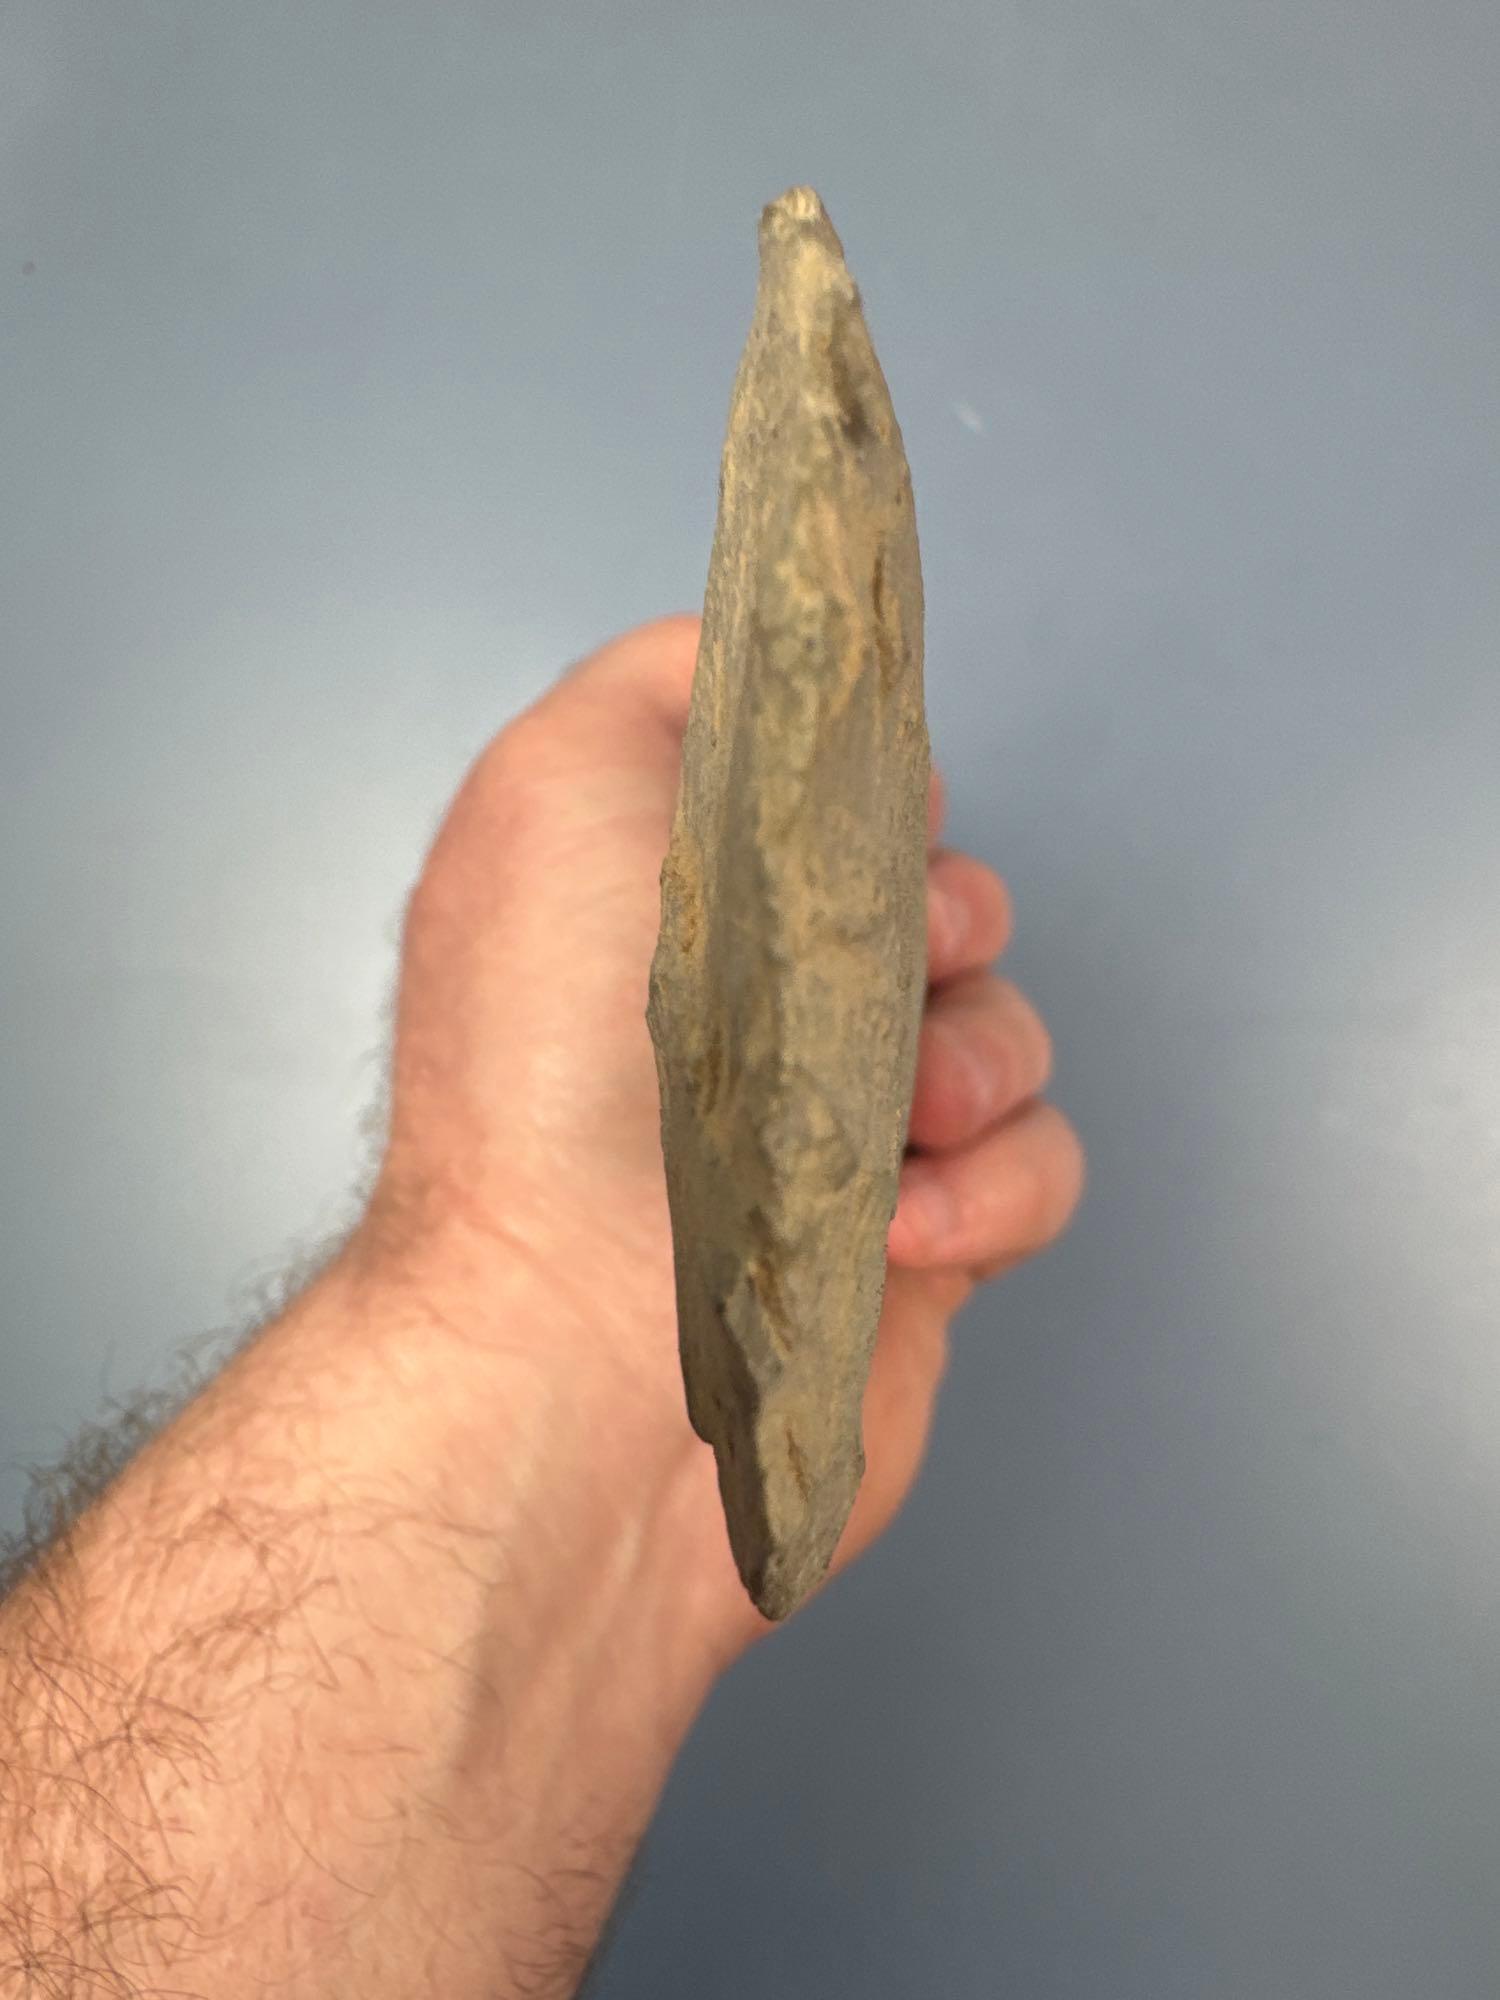 XL 7 3/4" Rhyolite Blade, HUGE, Found in PA/NJ/NY Tristate Area, Ex: Harry Mucklin, Lemaster, Ancien